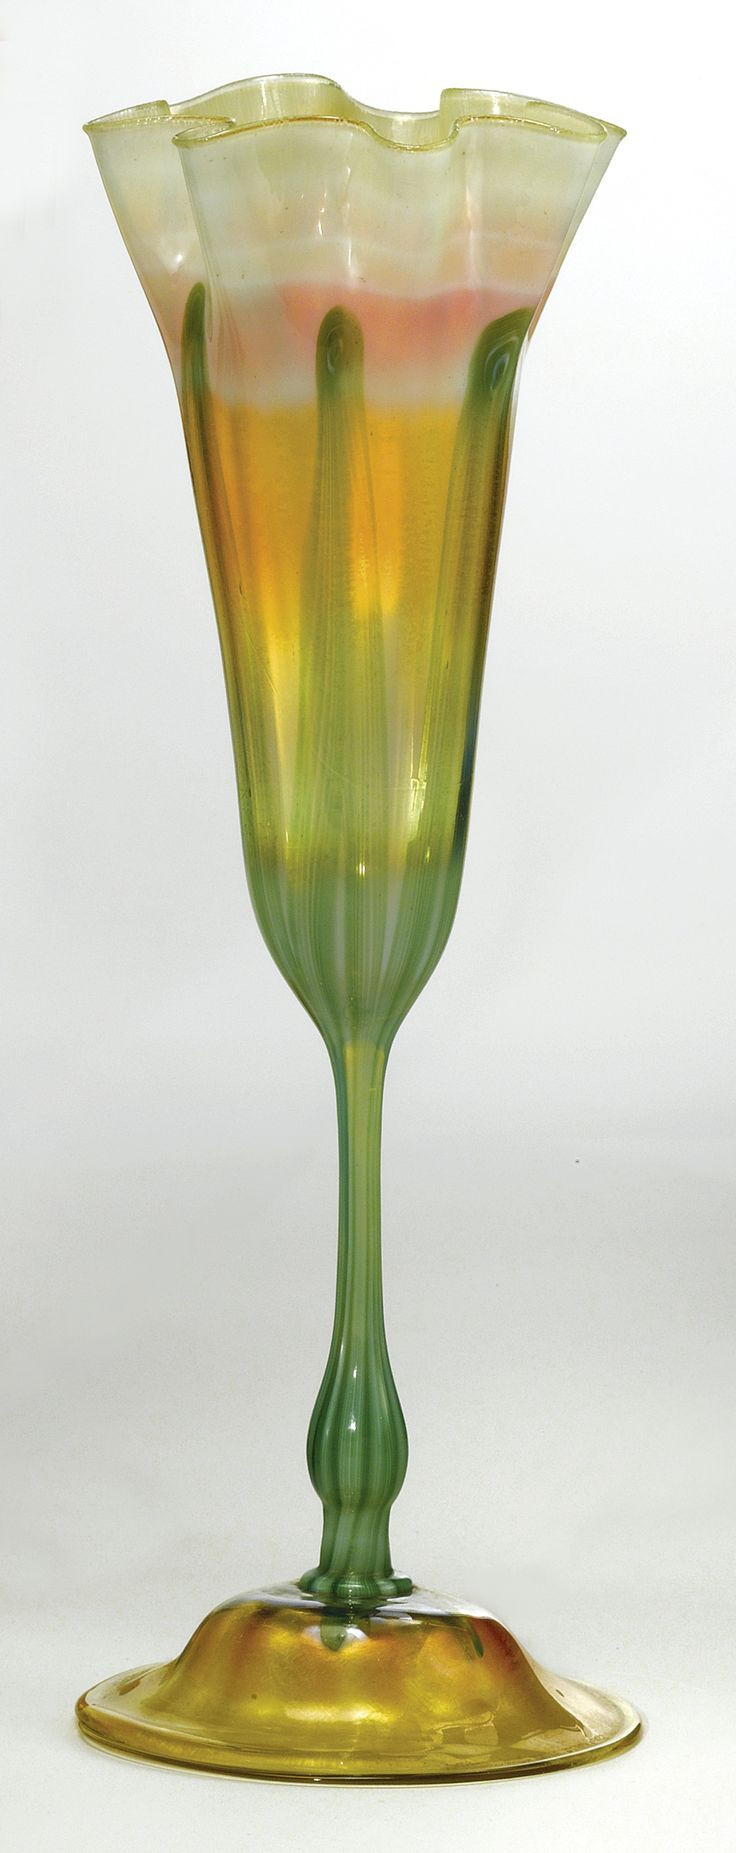 20 Spectacular Tiffany Tulip Vase 2024 free download tiffany tulip vase of 892 best dnc282dc2b5doddc2be images on pinterest glass art crystals and glass inside tiffany studios a monumental floriform vase ngraved l favrile glass 14 in